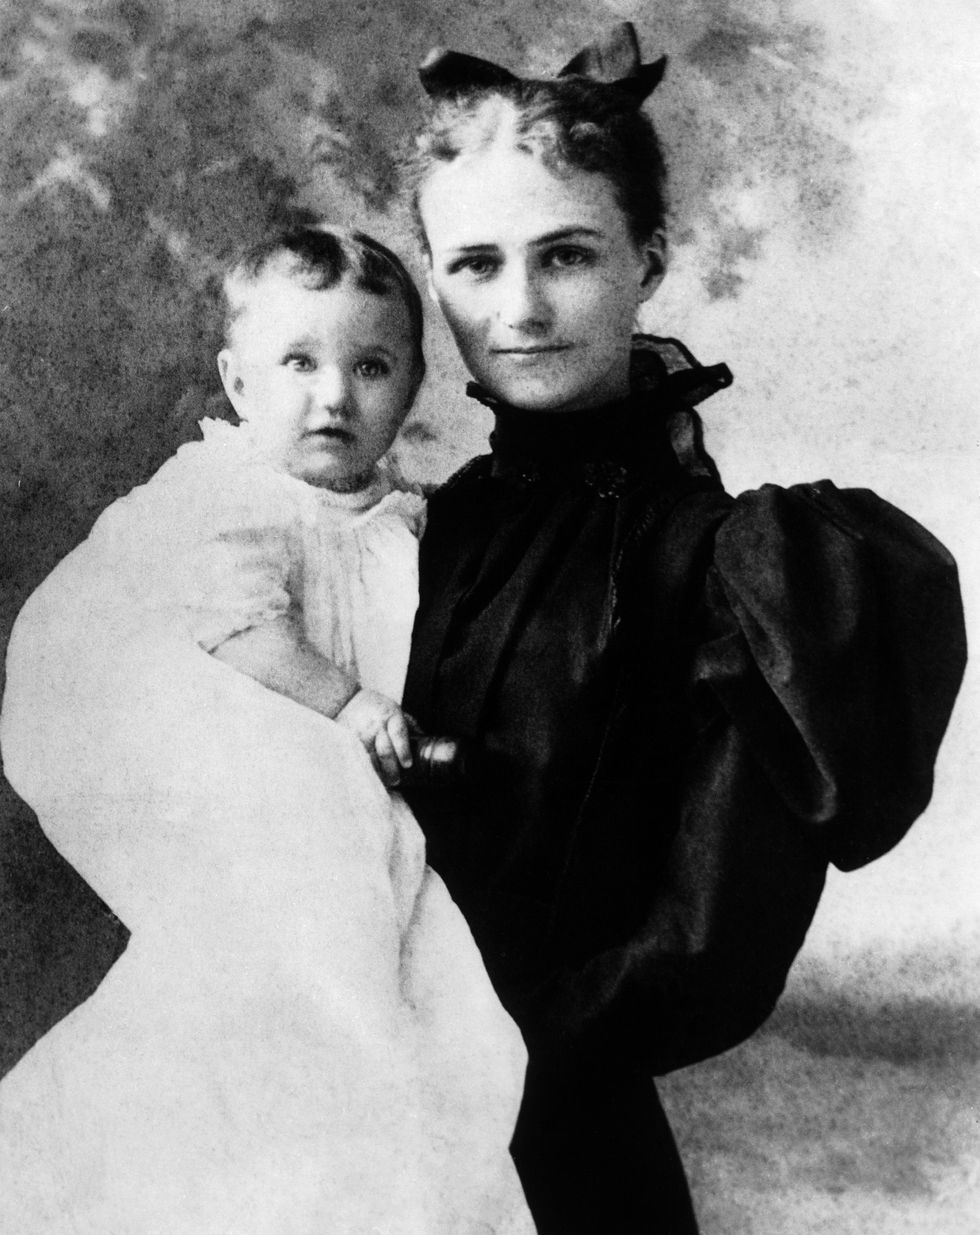 the duchess of windsor at the age of 6 months and her mother in 1896